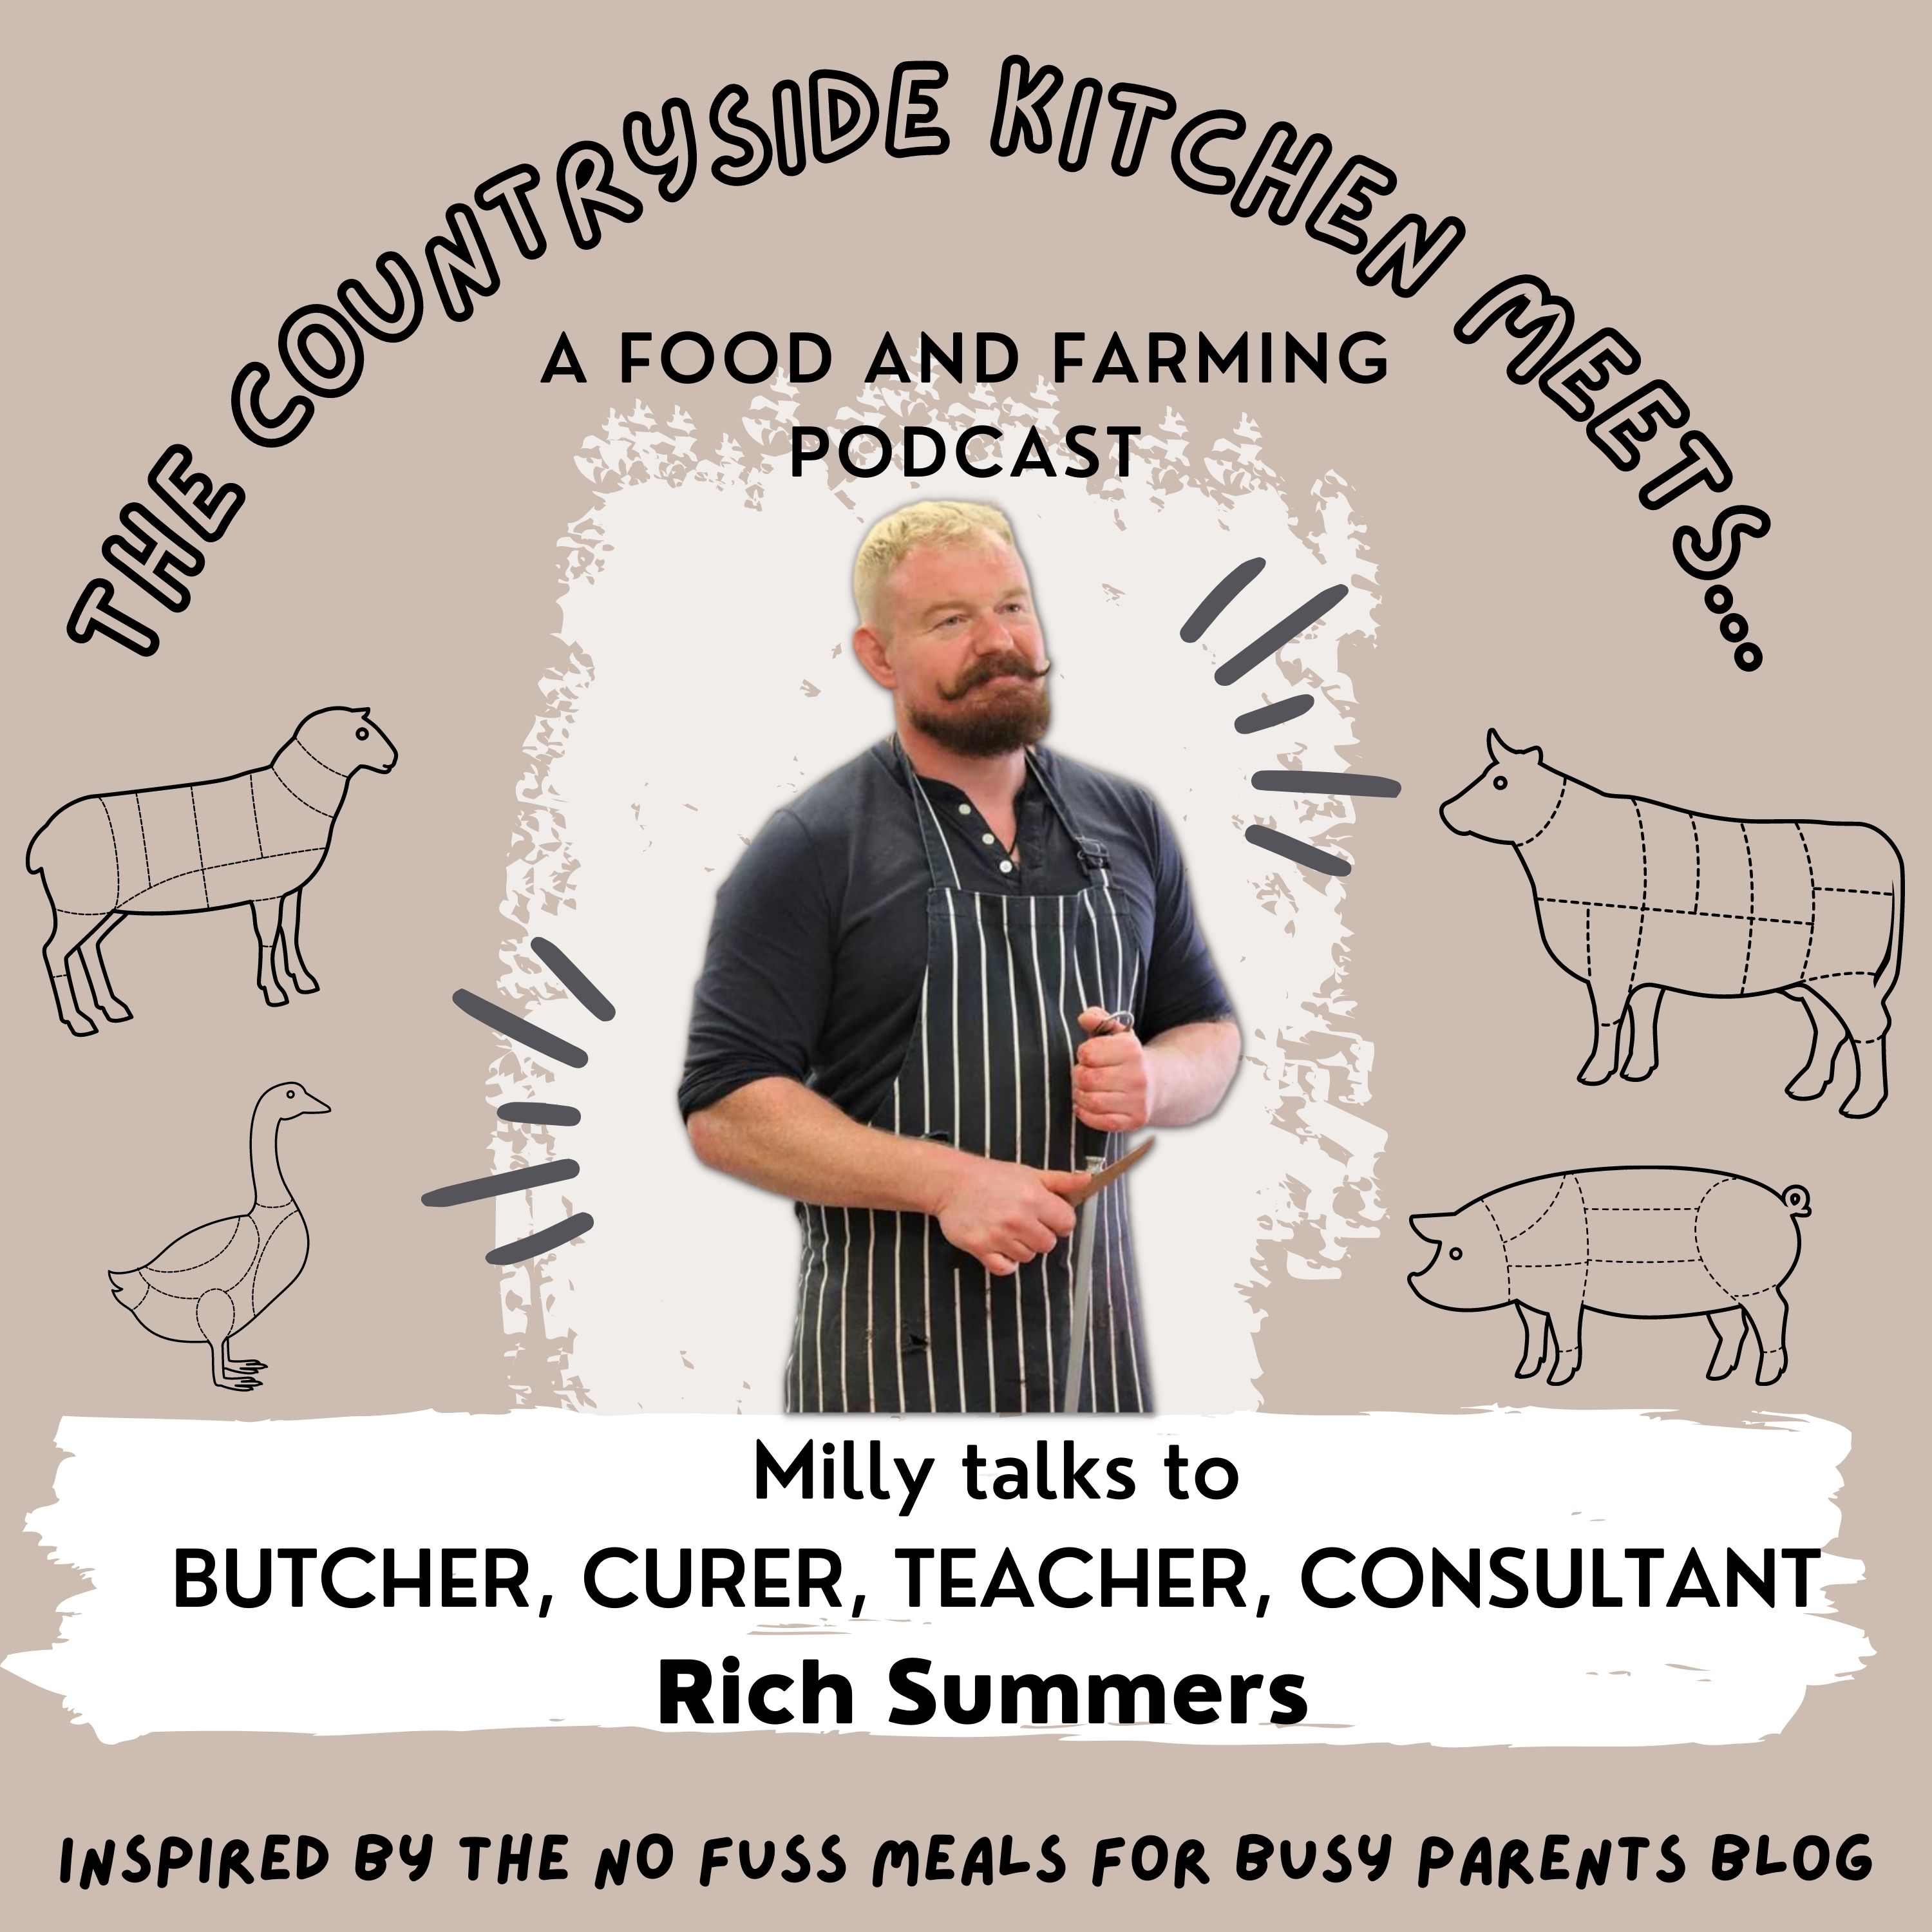 Artwork for podcast The Countryside Kitchen meets...